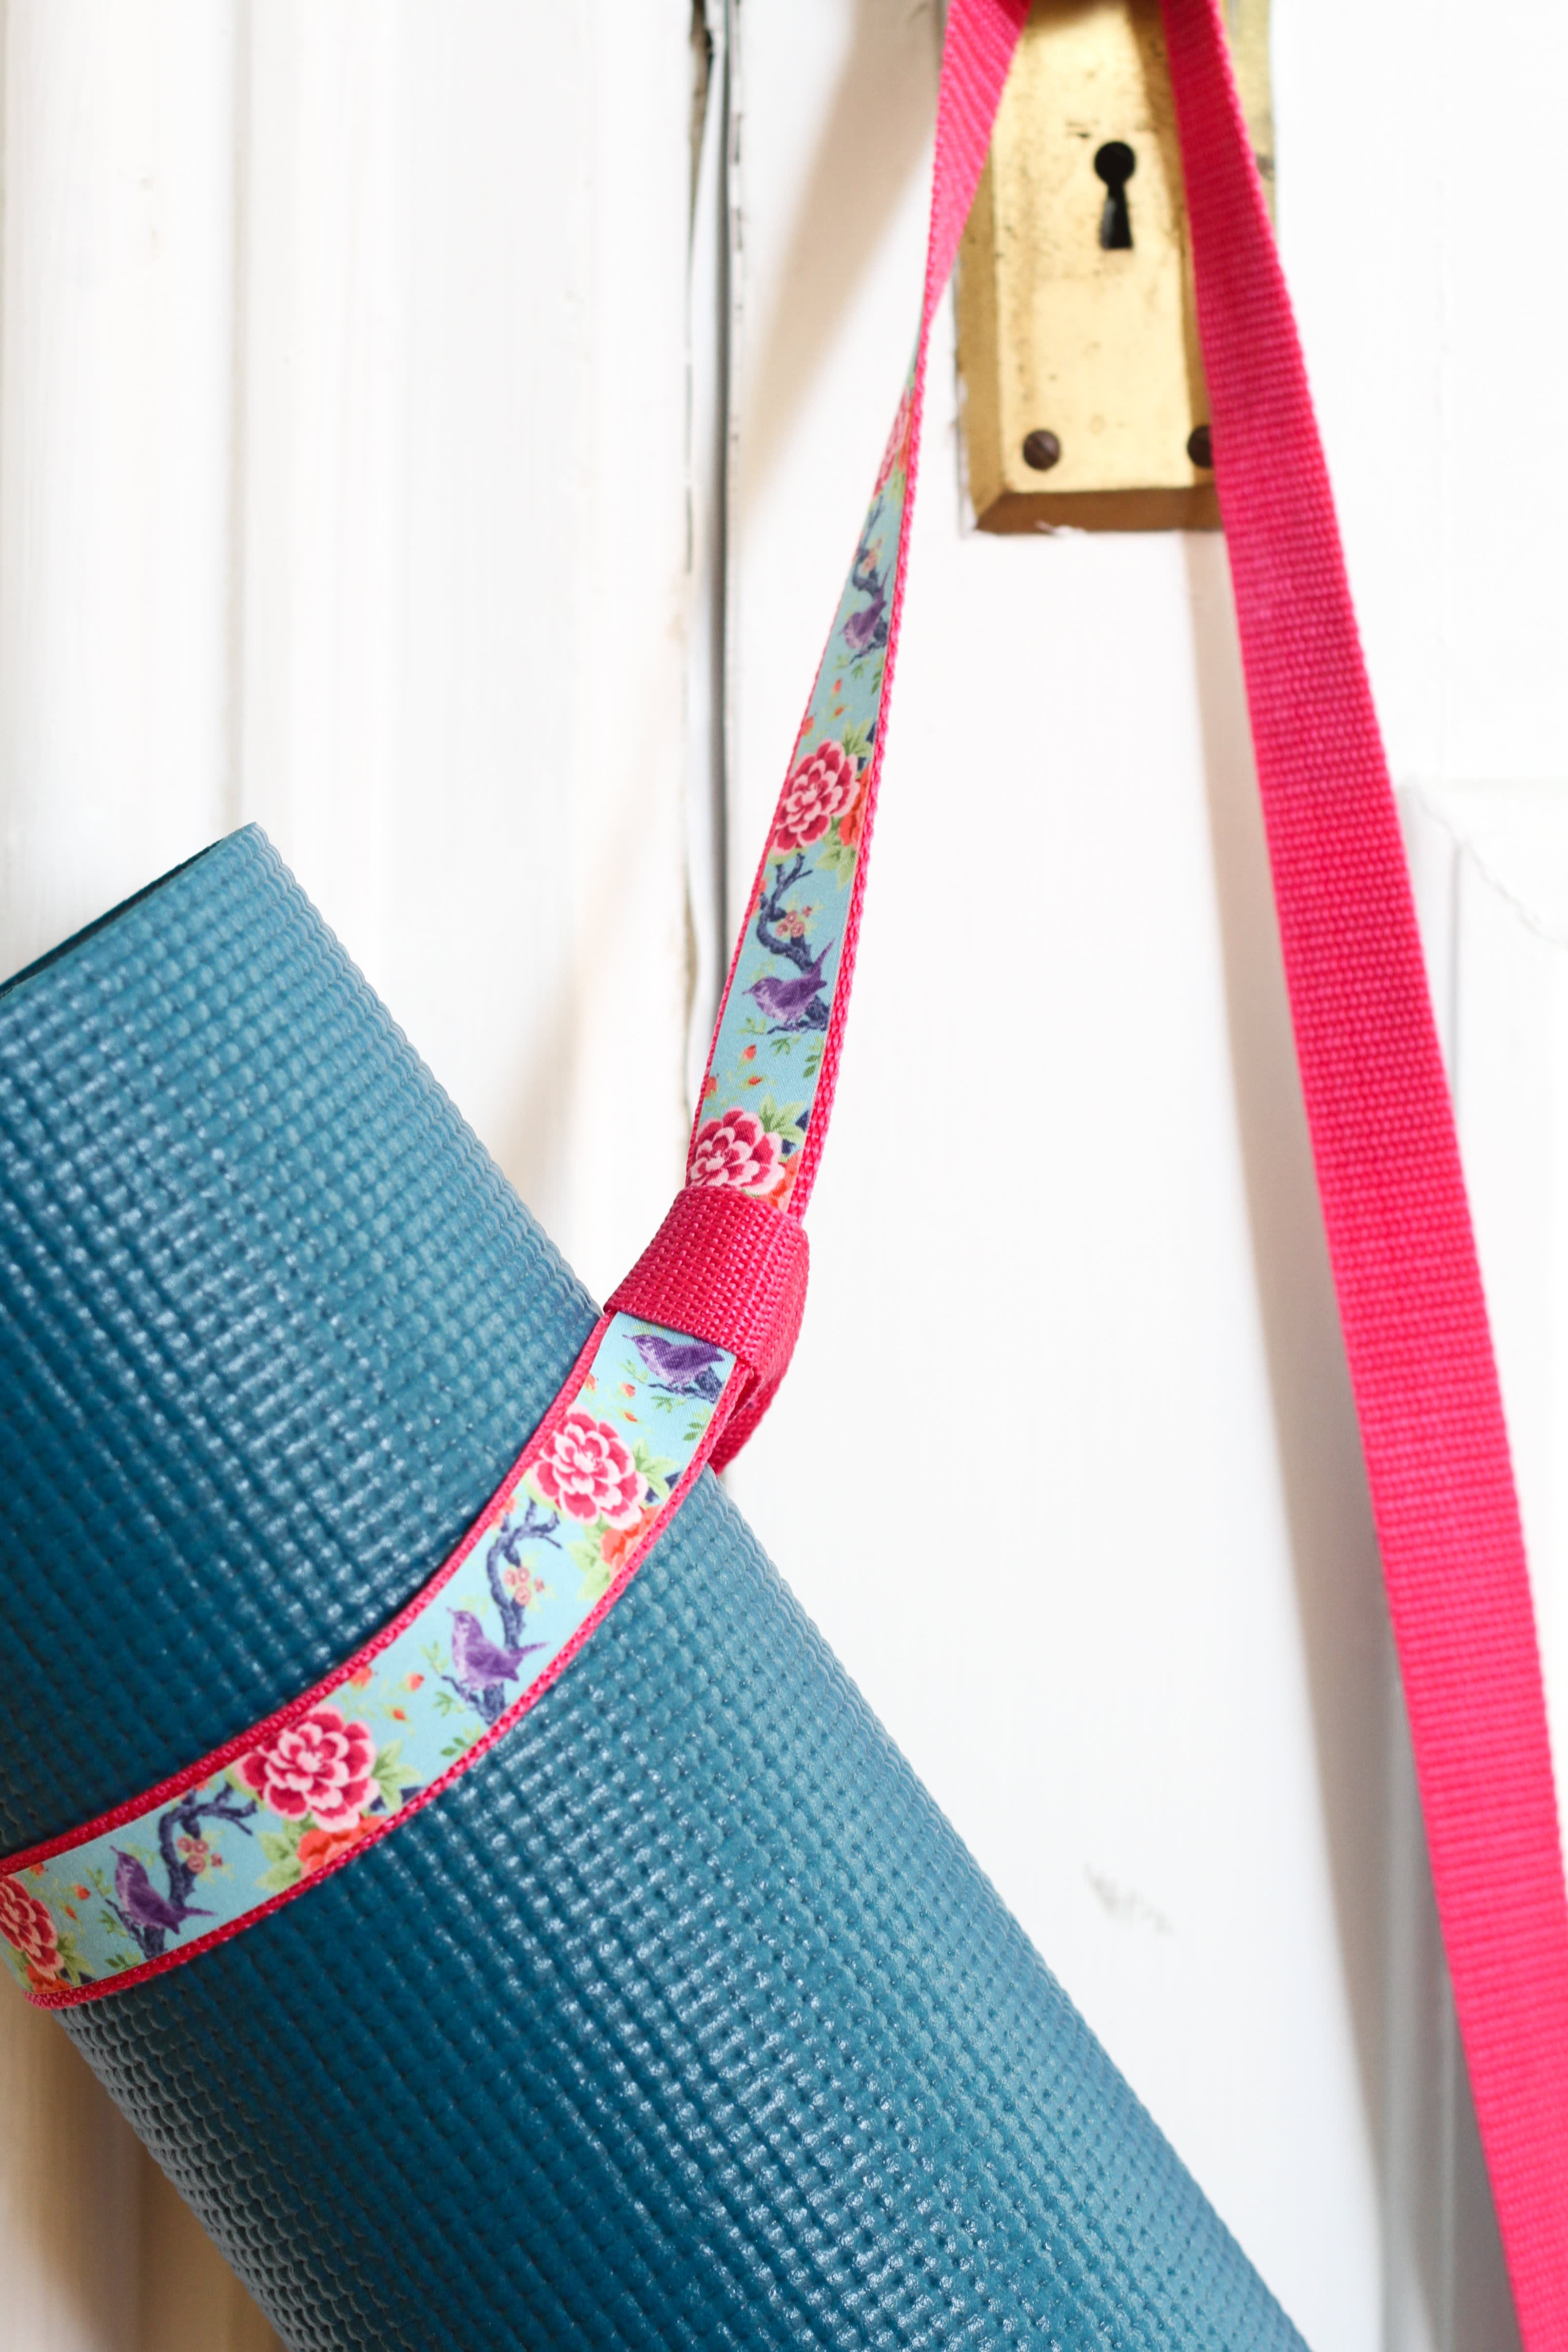 How To Make A Simple DIY Leather Yoga Mat Strap